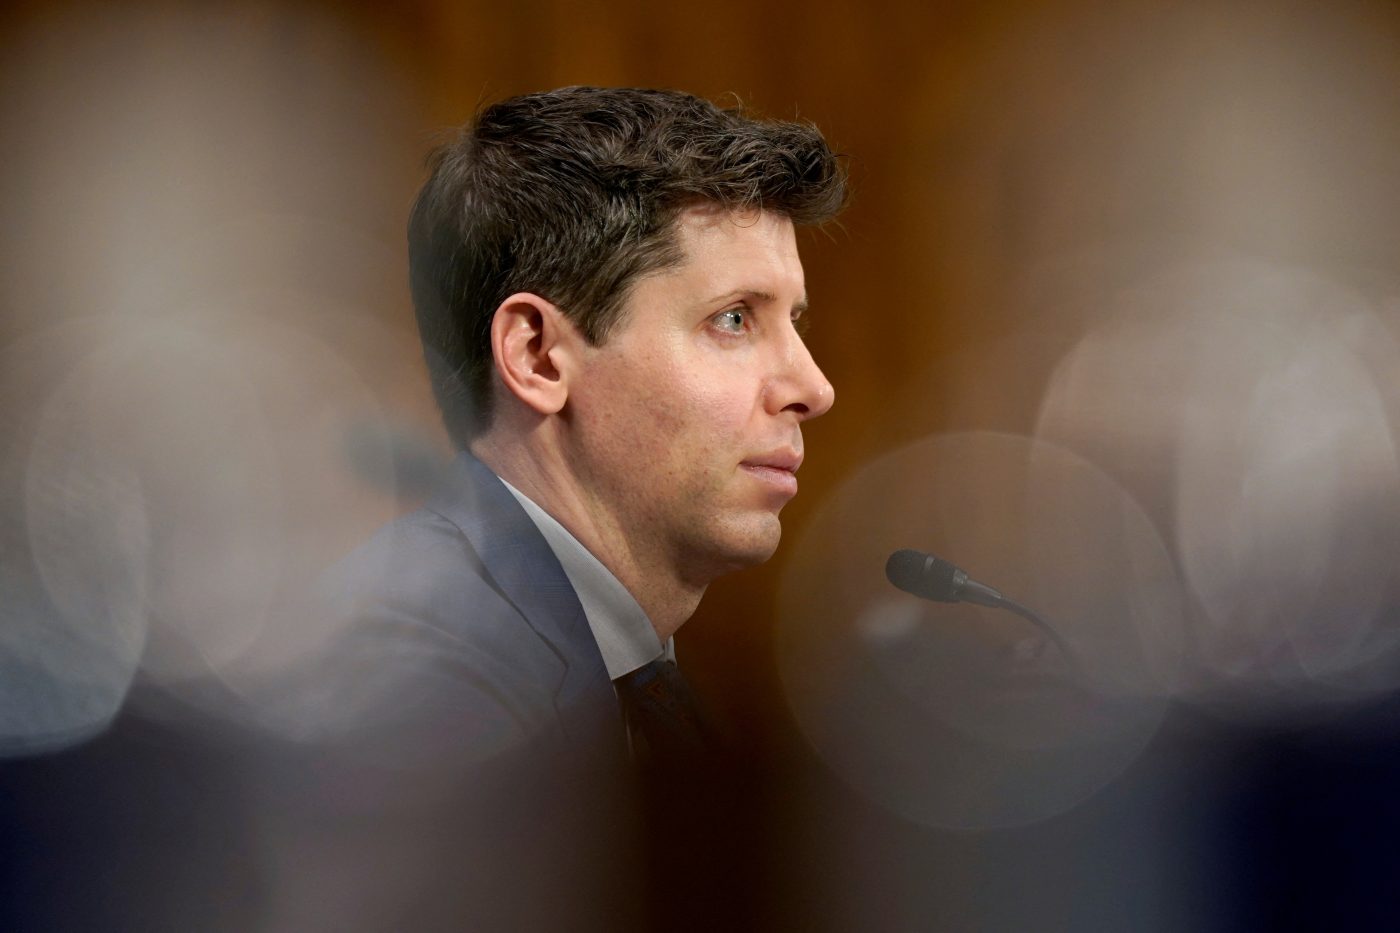 Photo: OpenAI CEO Sam Altman testifies before a Senate Judiciary Privacy, Technology & the Law Subcommittee hearing titled 'Oversight of A.I.: Rules for Artificial Intelligence' on Capitol Hill in Washington, US, May 16, 2023. Credit: REUTERS/Elizabeth Frantz.